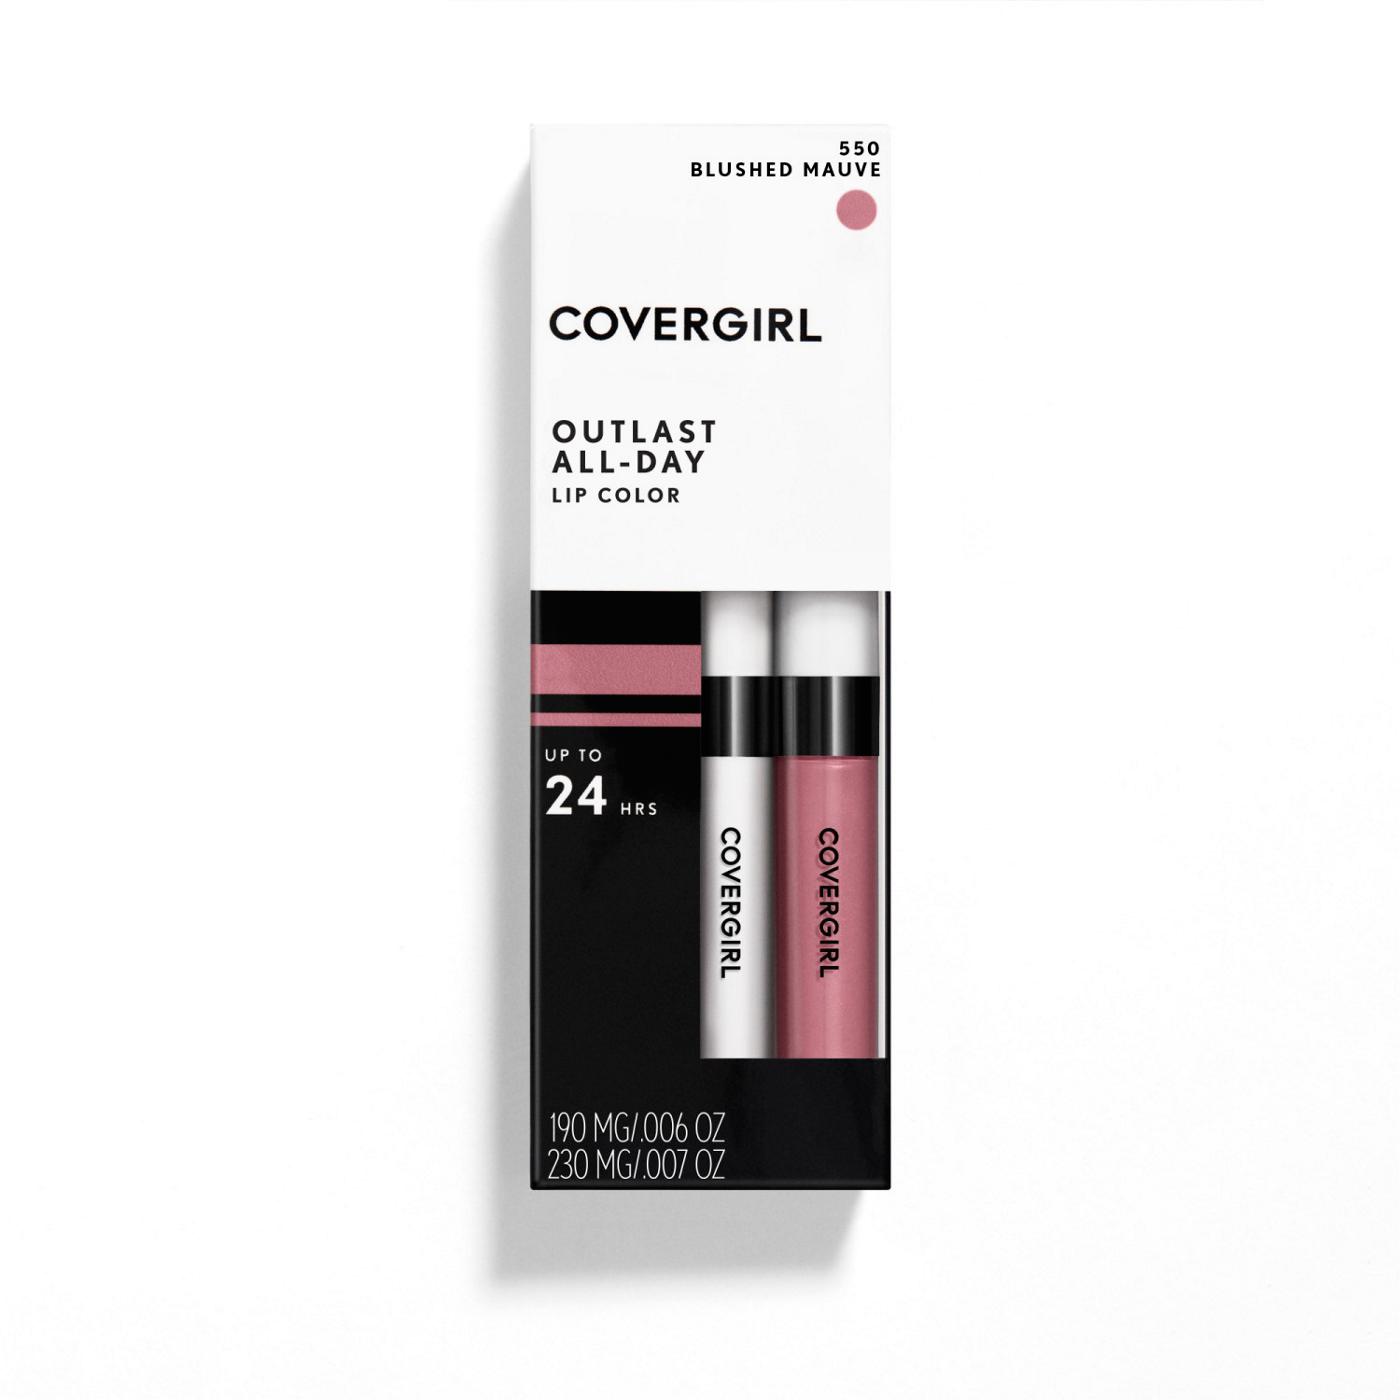 Covergirl Outlast All-Day Lipcolor - 550 Blushed Mauve; image 1 of 5